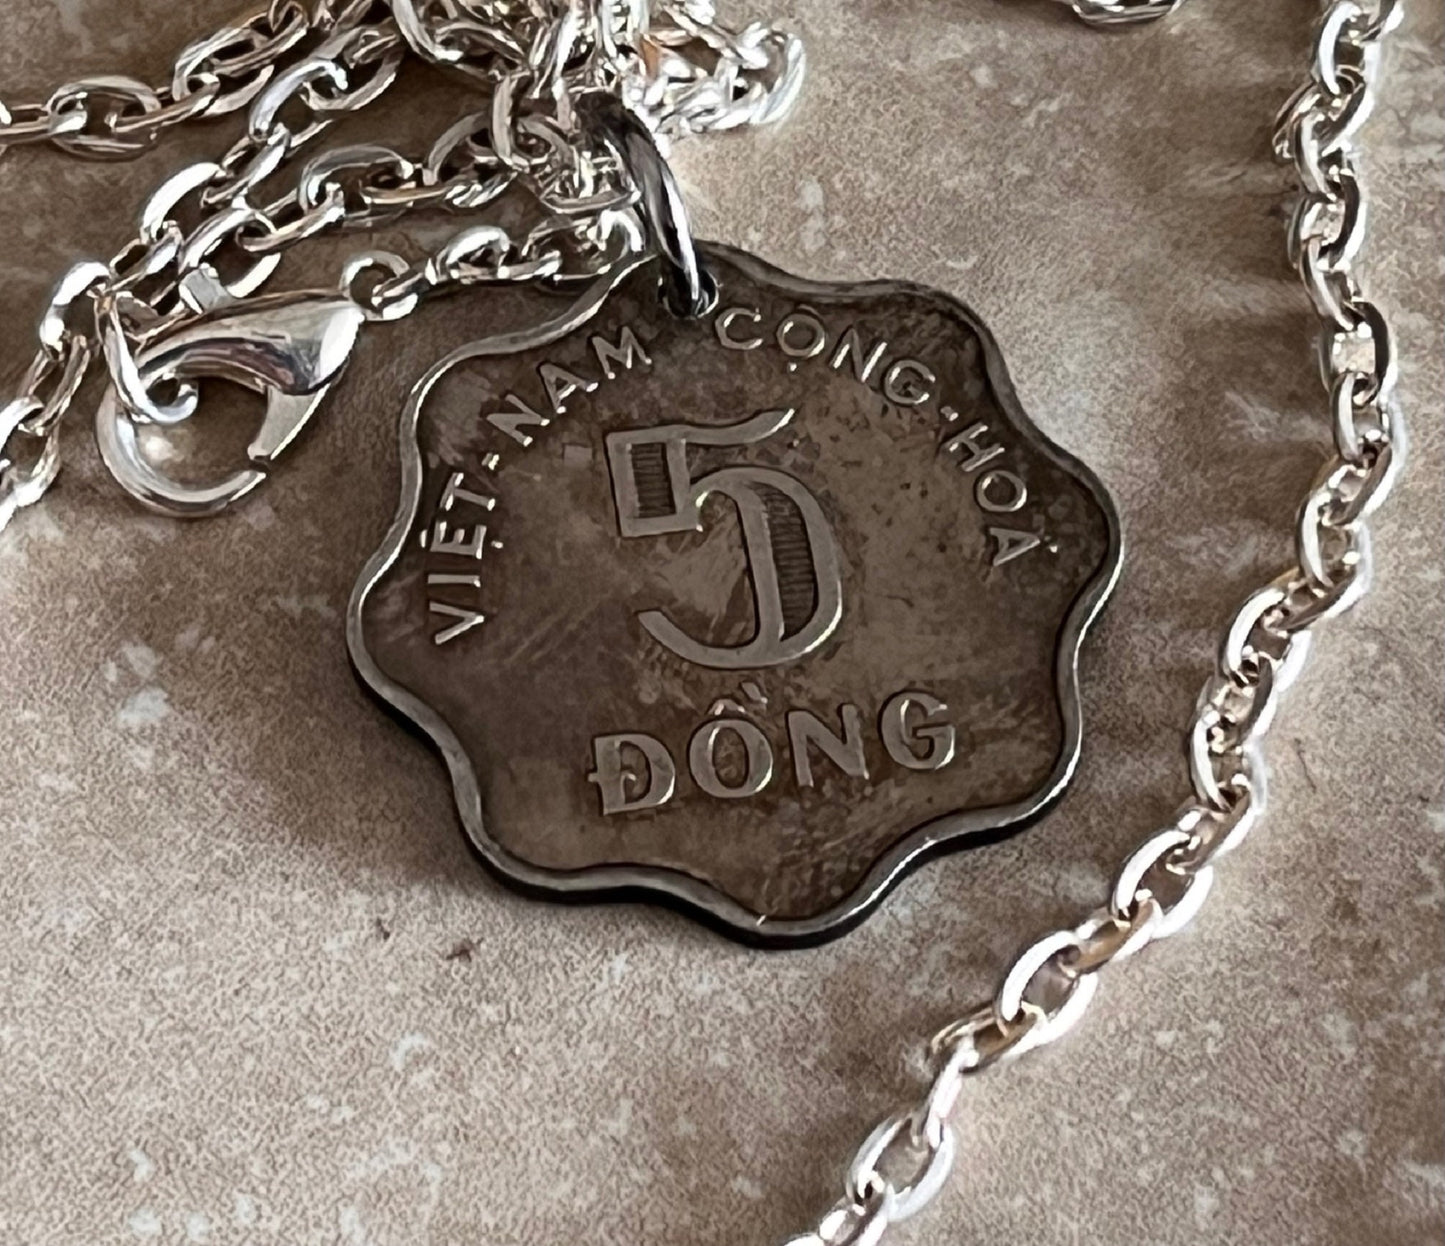 Viet Nam Coin Necklace 5 Dong Coin Hoa Pendant Personal Old Vintage Handmade Jewelry Gift Friend Charm For Him Her World Coin Collector